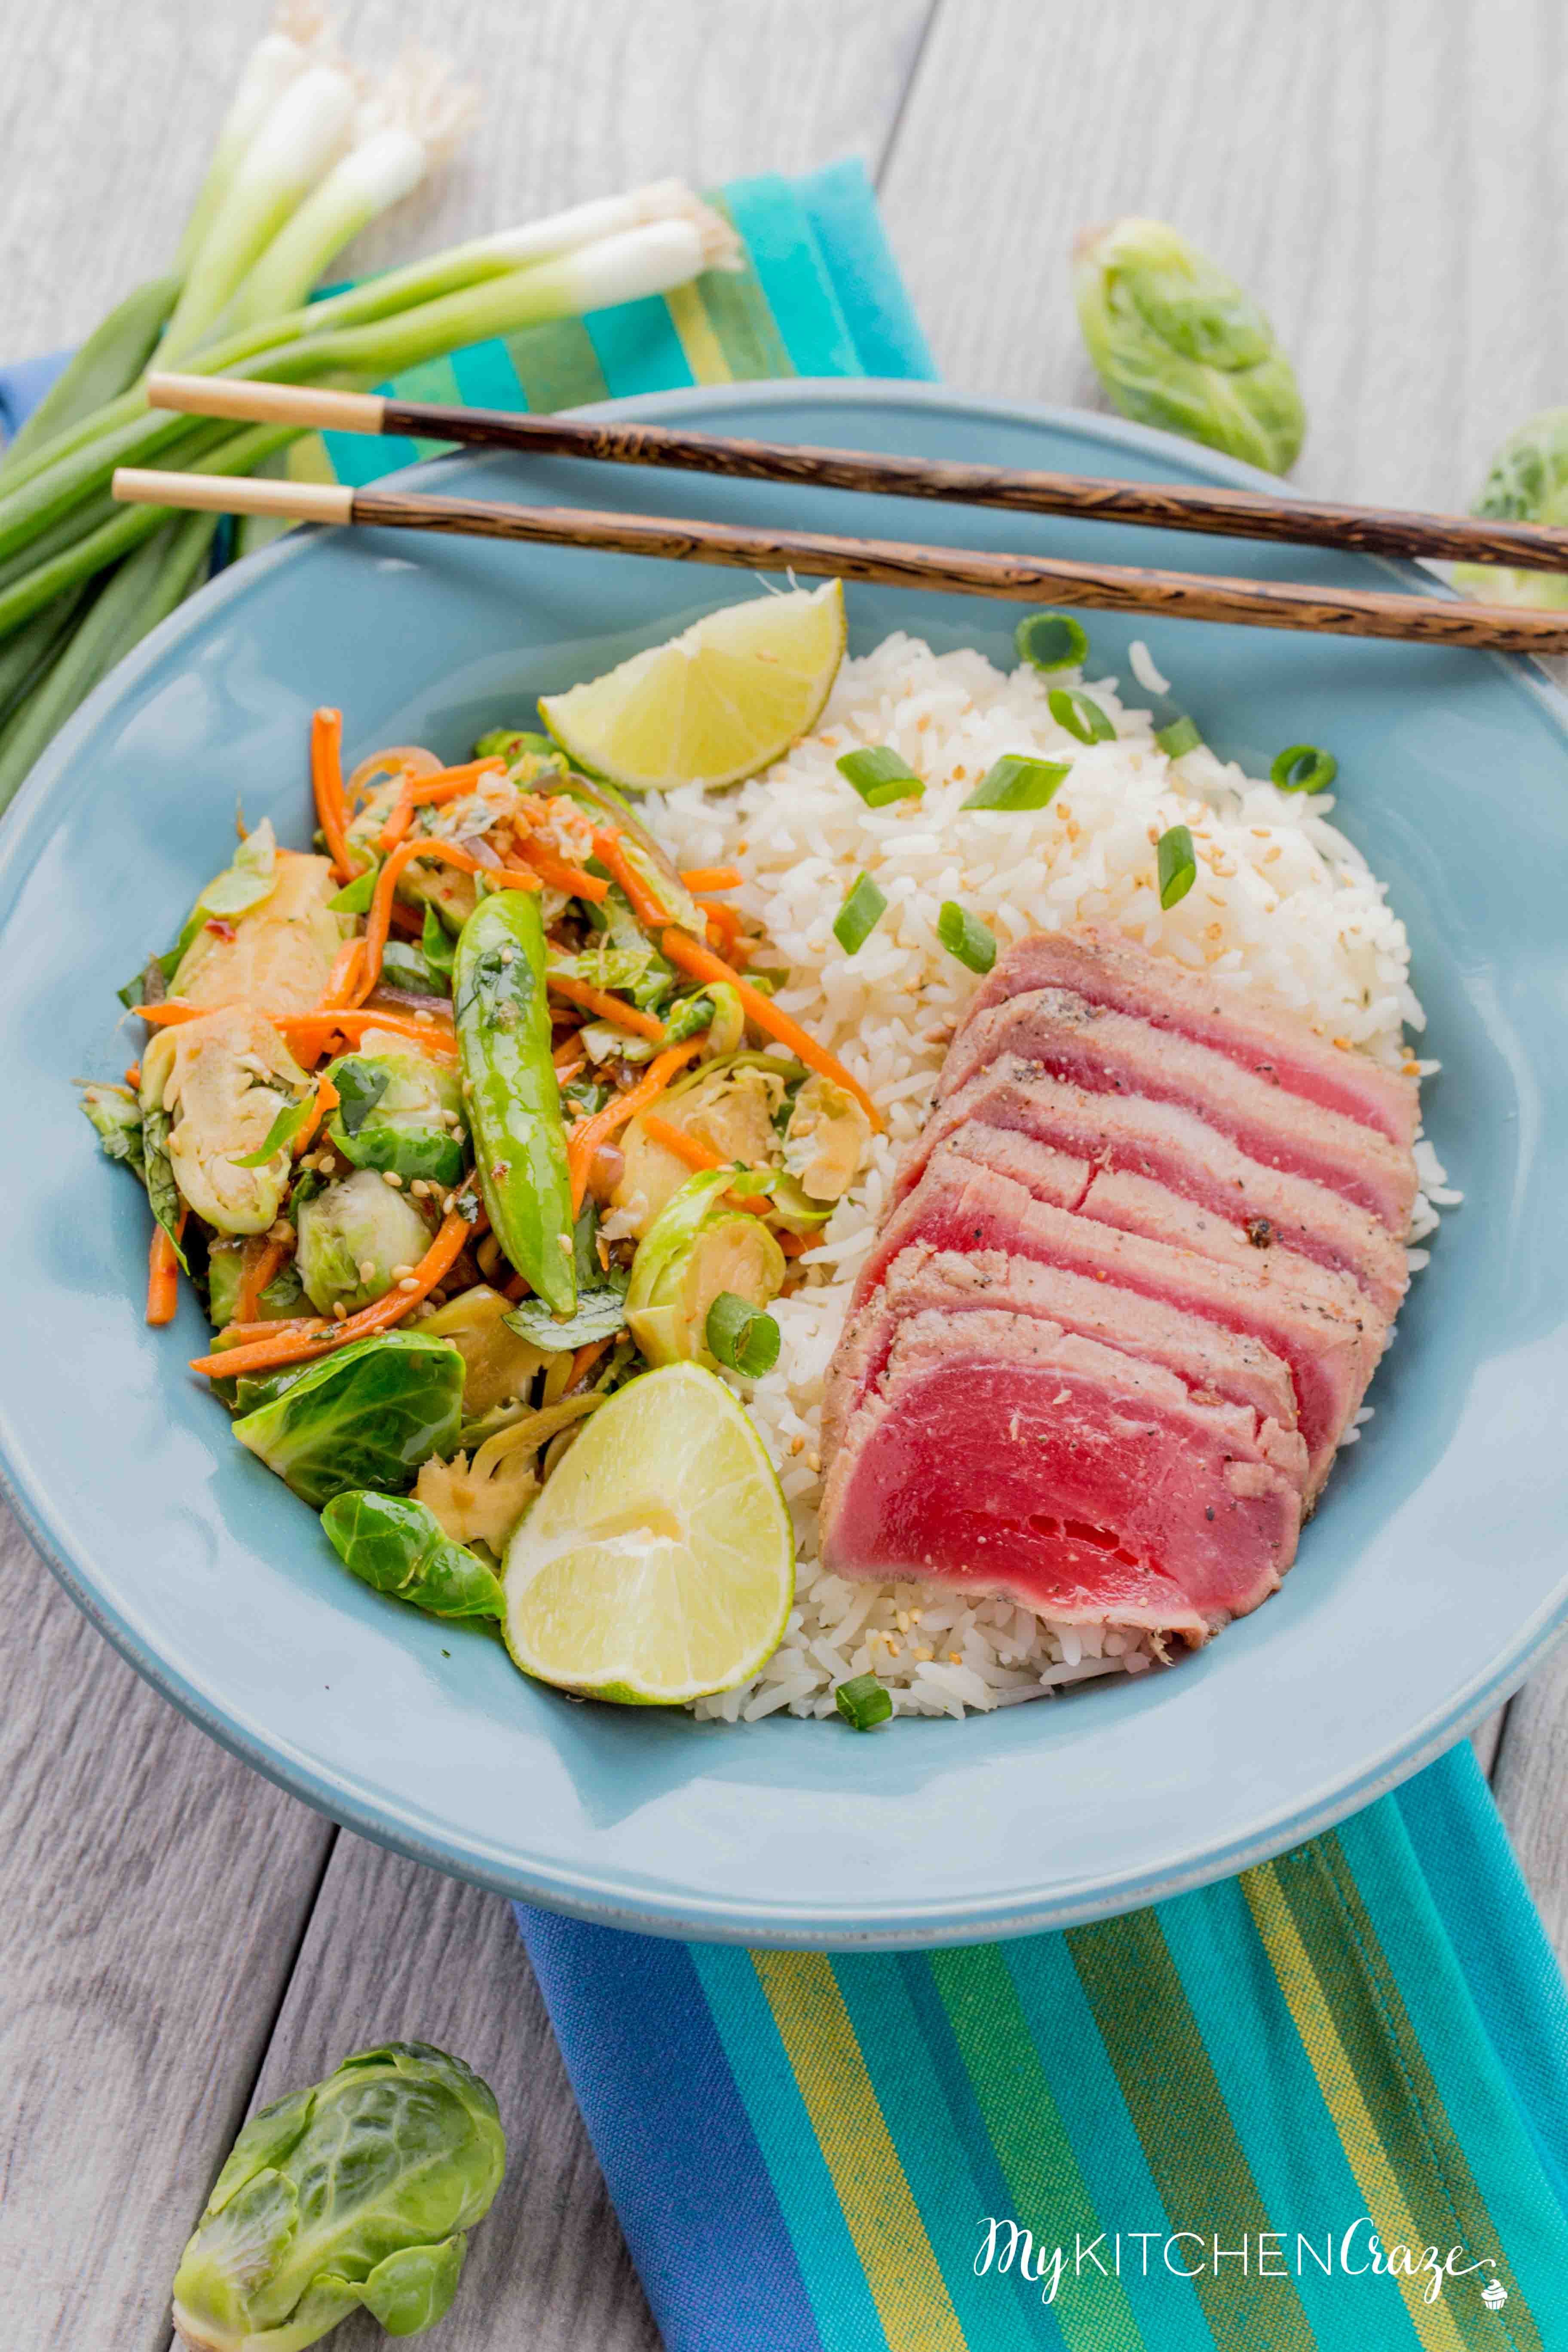 Ahi Tuna Rice Bowls ~ mykitchencraze.com ~ Enjoy these delicious Ahi Tuna Rice Bowls for dinner. These rice bowls are loaded with sautéed vegetables and fresh quality Ahi Tuna! Have a healthy delicious meal on your table within 30 minutes!